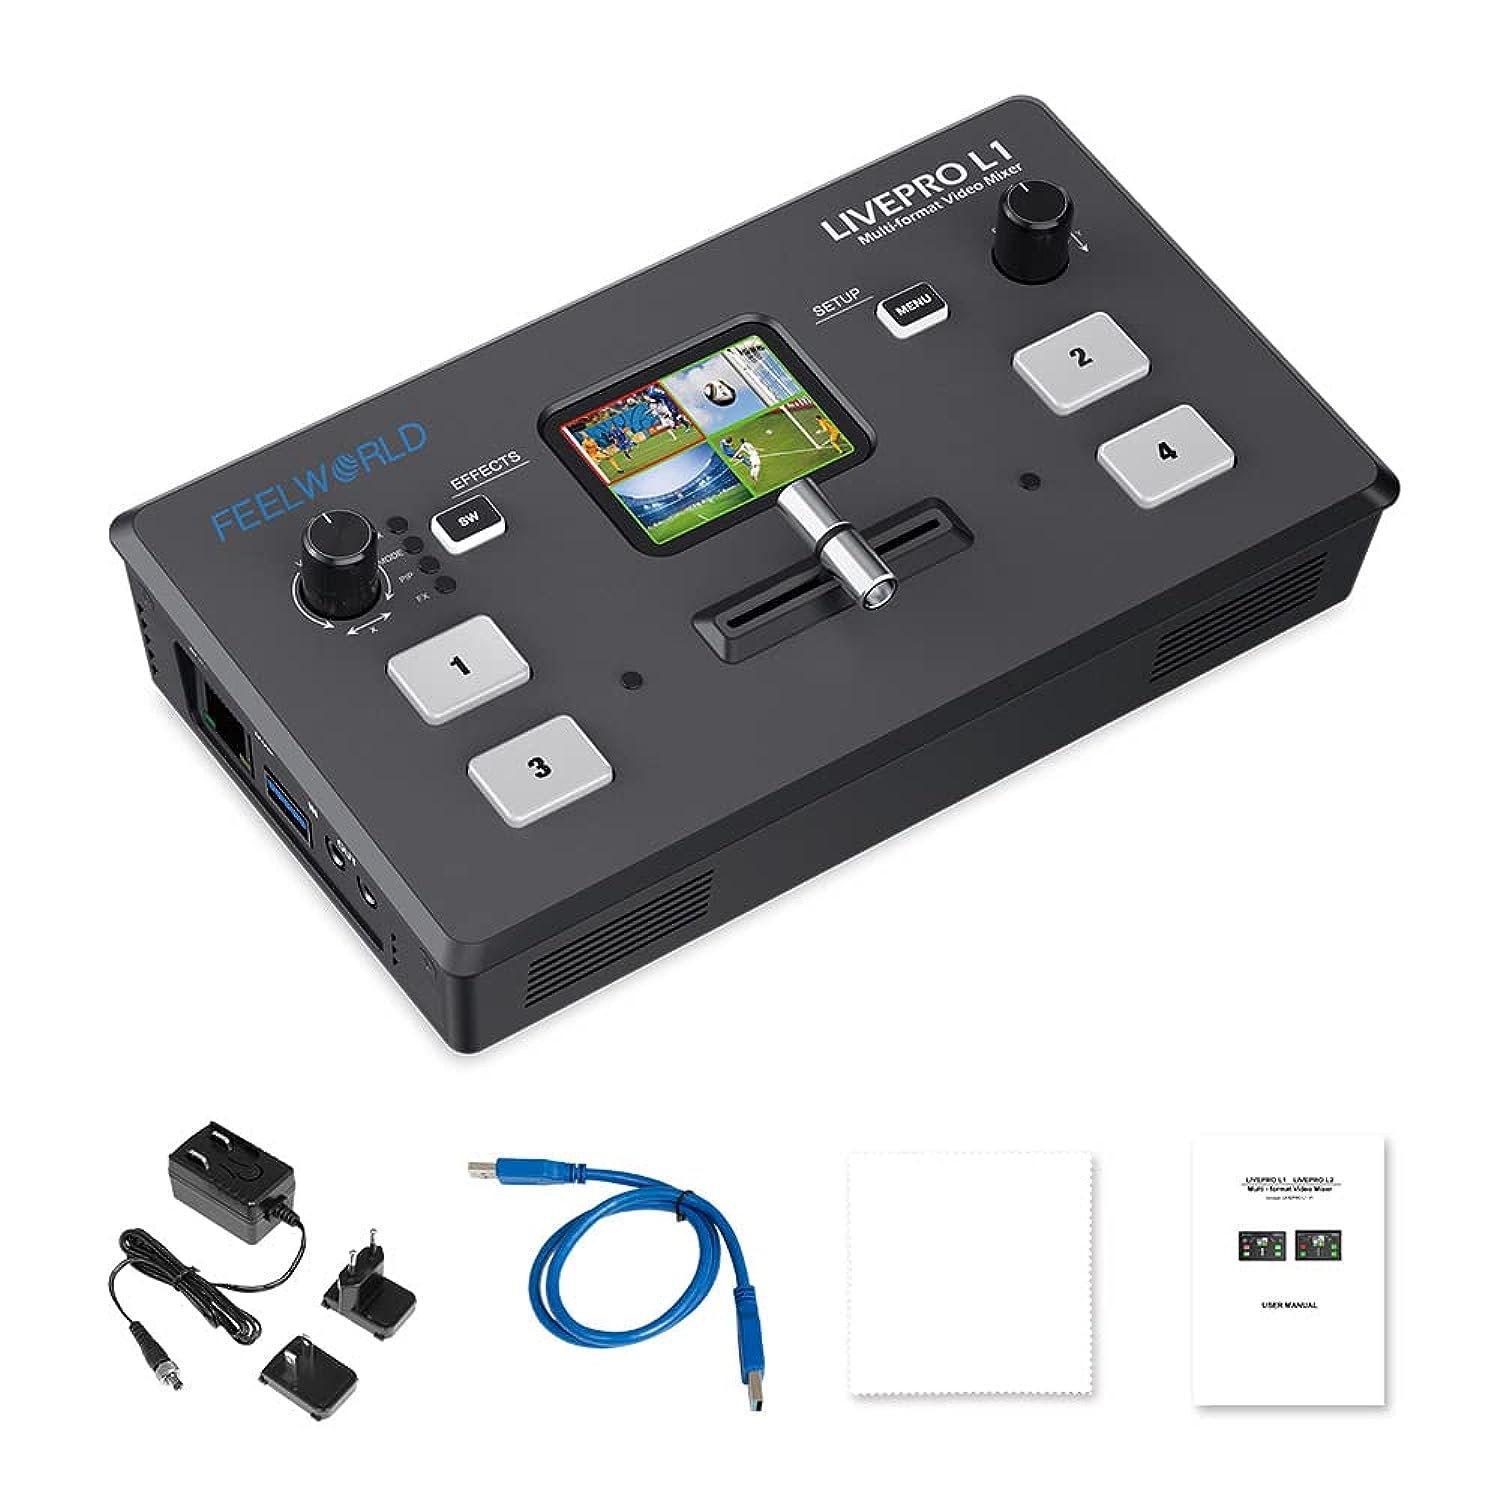 Livepro L1 4 X Hdmi Inputs Multi Format Video Mixer Switcher Usb 3.0 Output Real Time Live